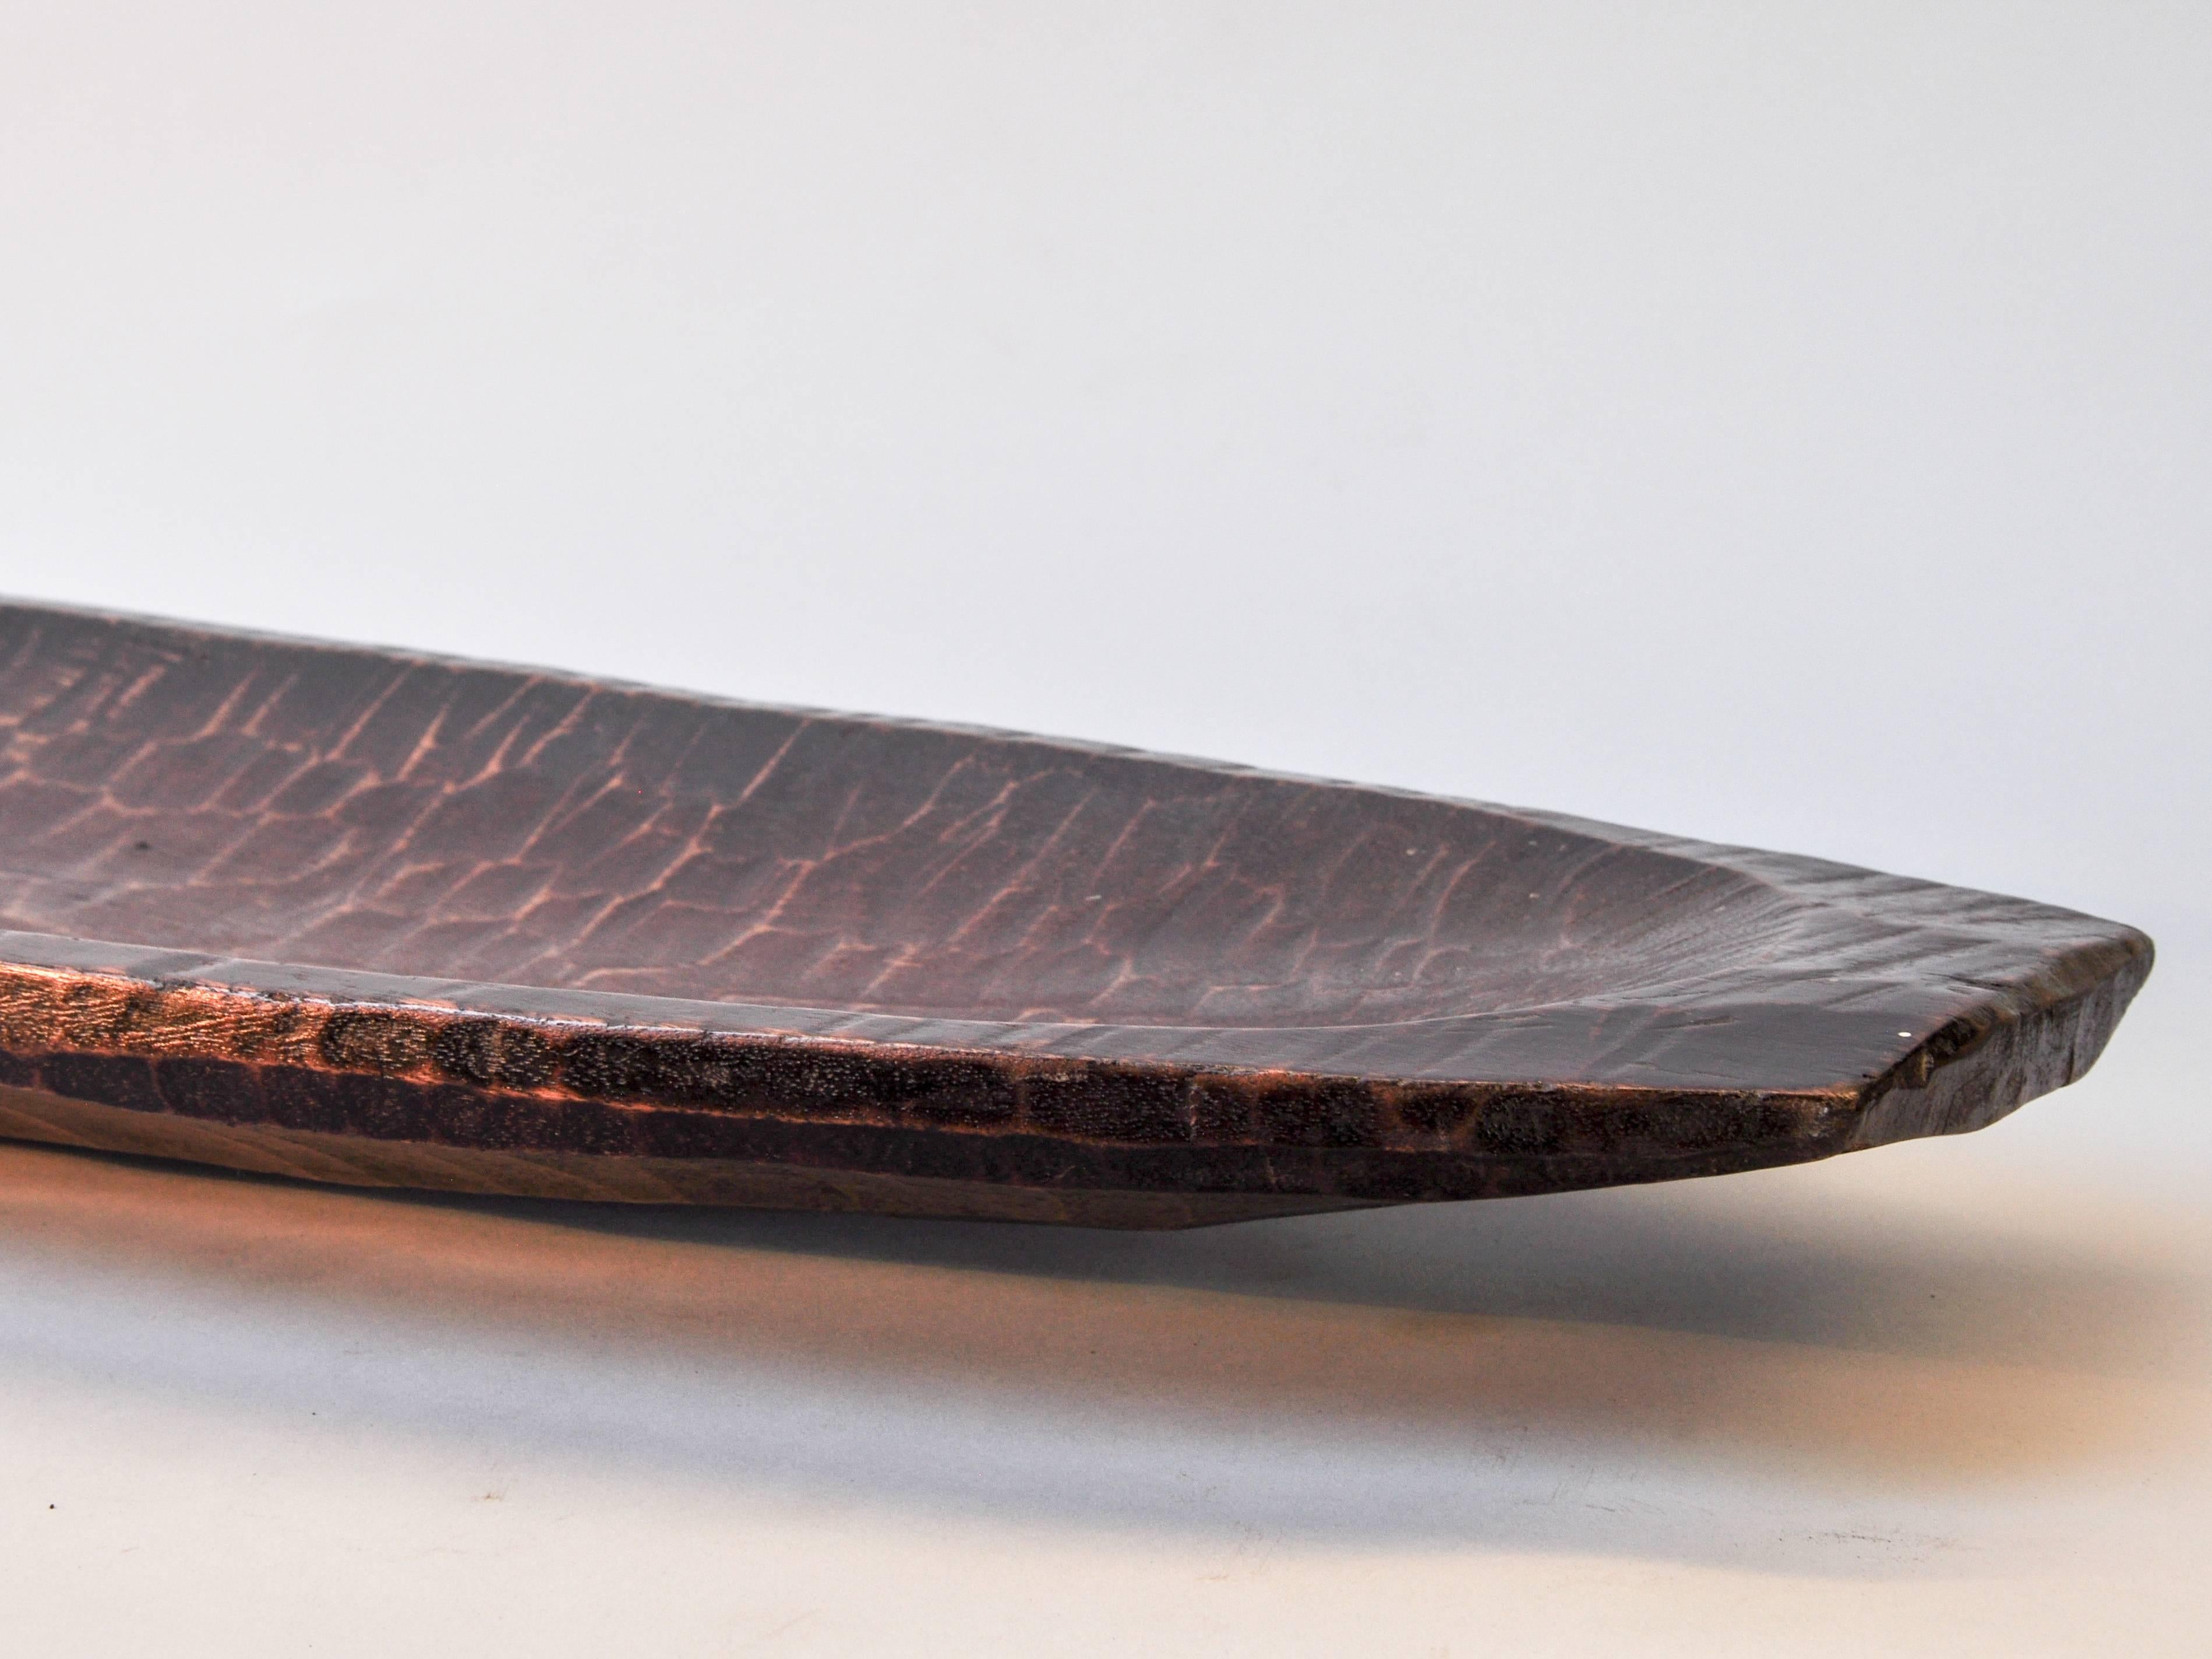 Indonesian Tribal Hand Hewn Wooden Tray from the Mentawai Islands, Mid-Late 20th Century.